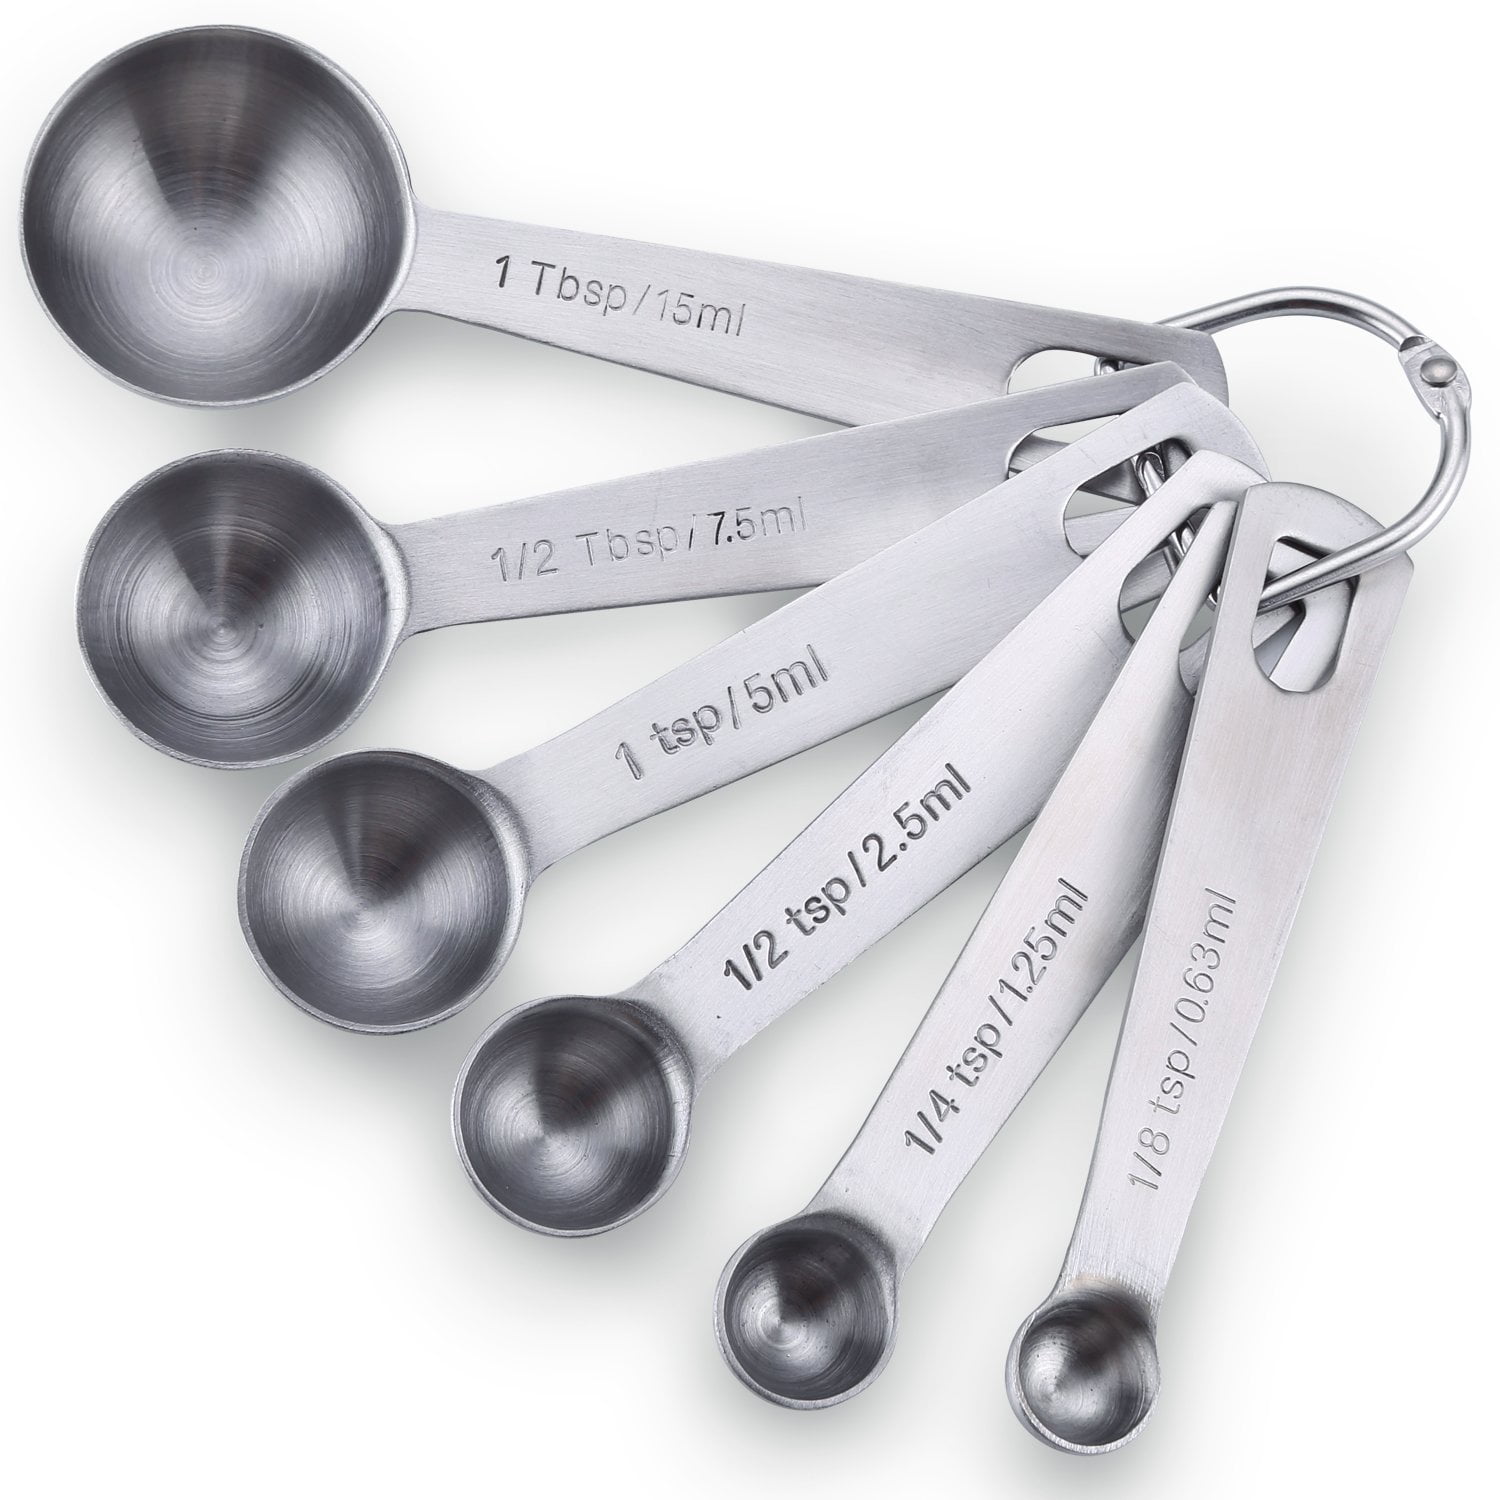 Spring Chef - Stainless Steel Measuring Cups, Kitchen Tools with Easy to Read Markings for Measuring Dry or Liquid Ingredients, Set of 7, Silver